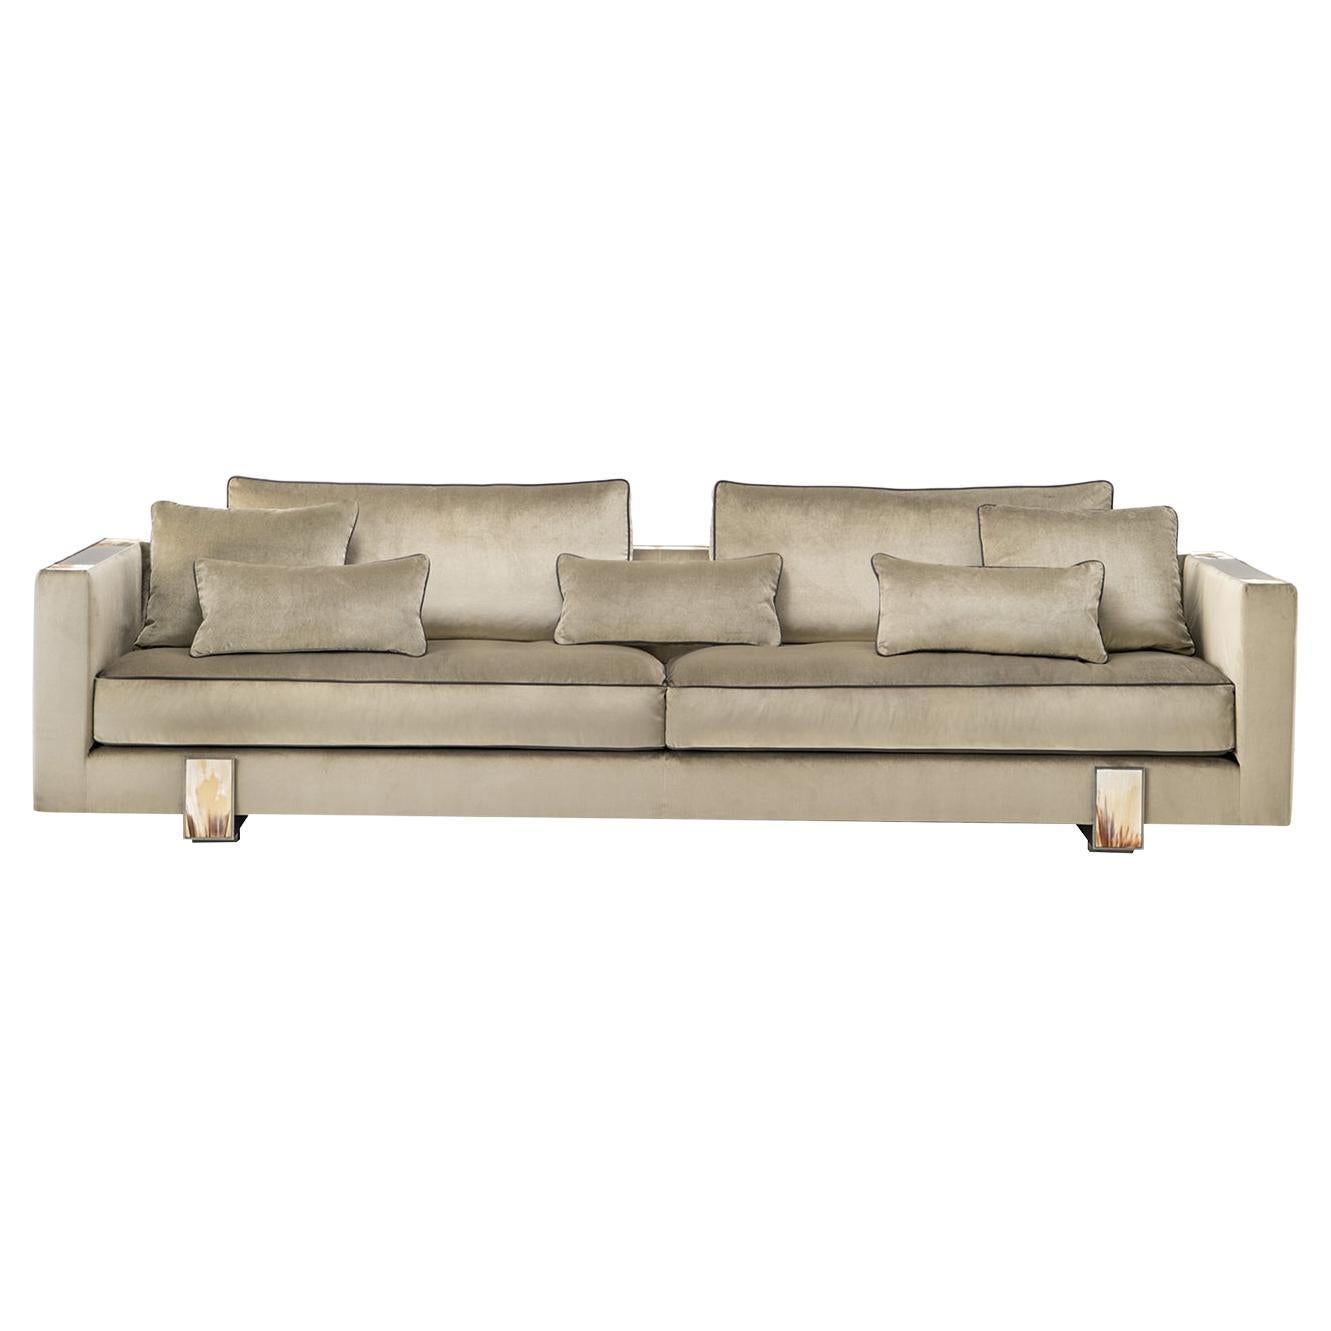 Adriano 4-Seater Beige Sofa with Horn Inlays For Sale